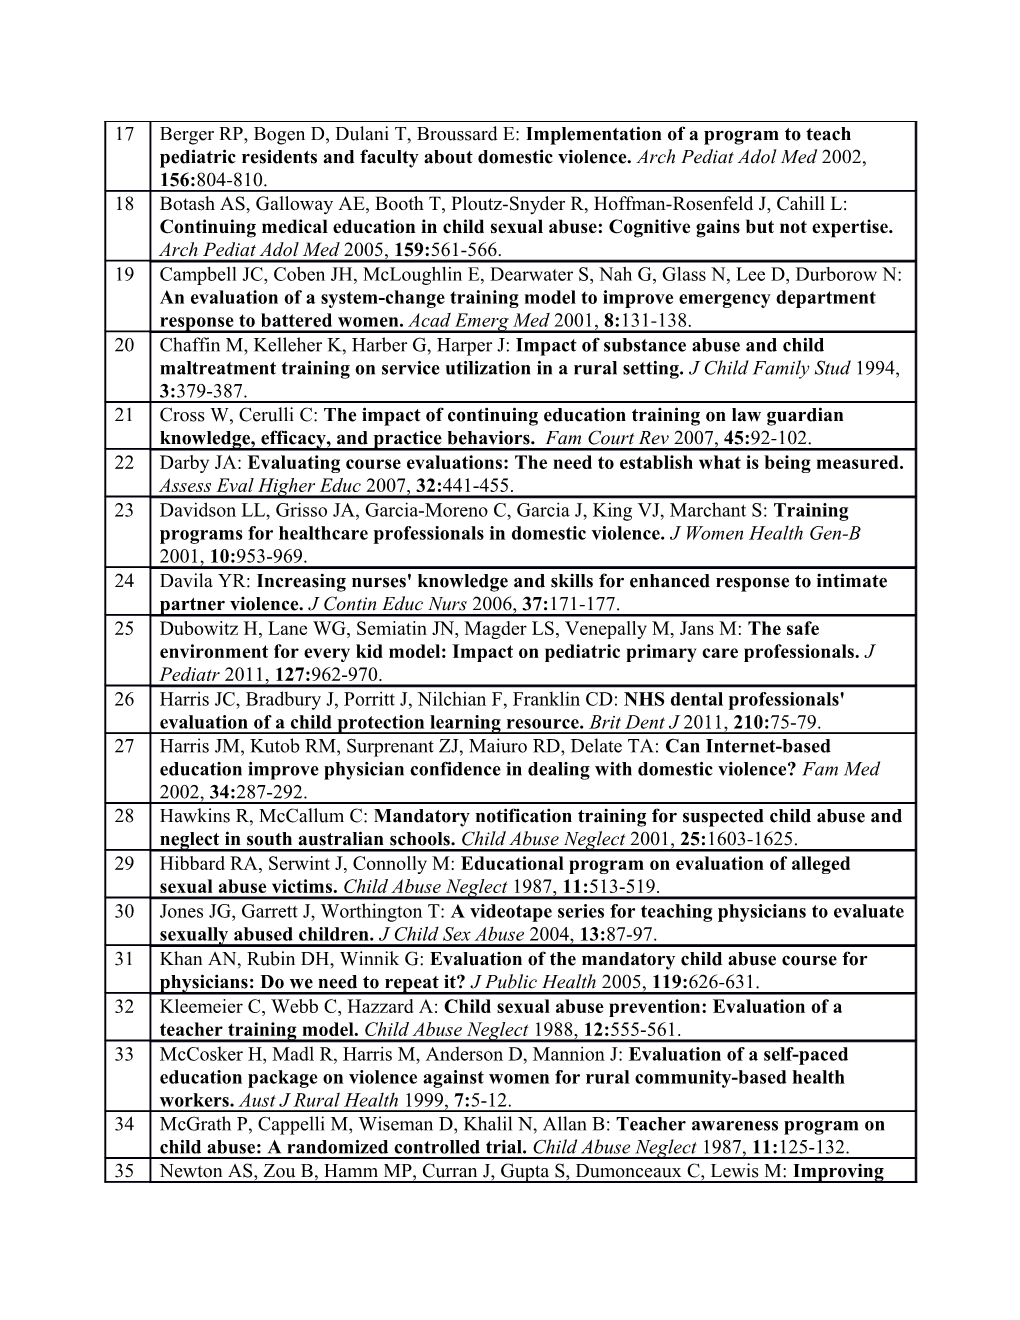 Additional File 2: Reference List of All 62 Articles Included in Review